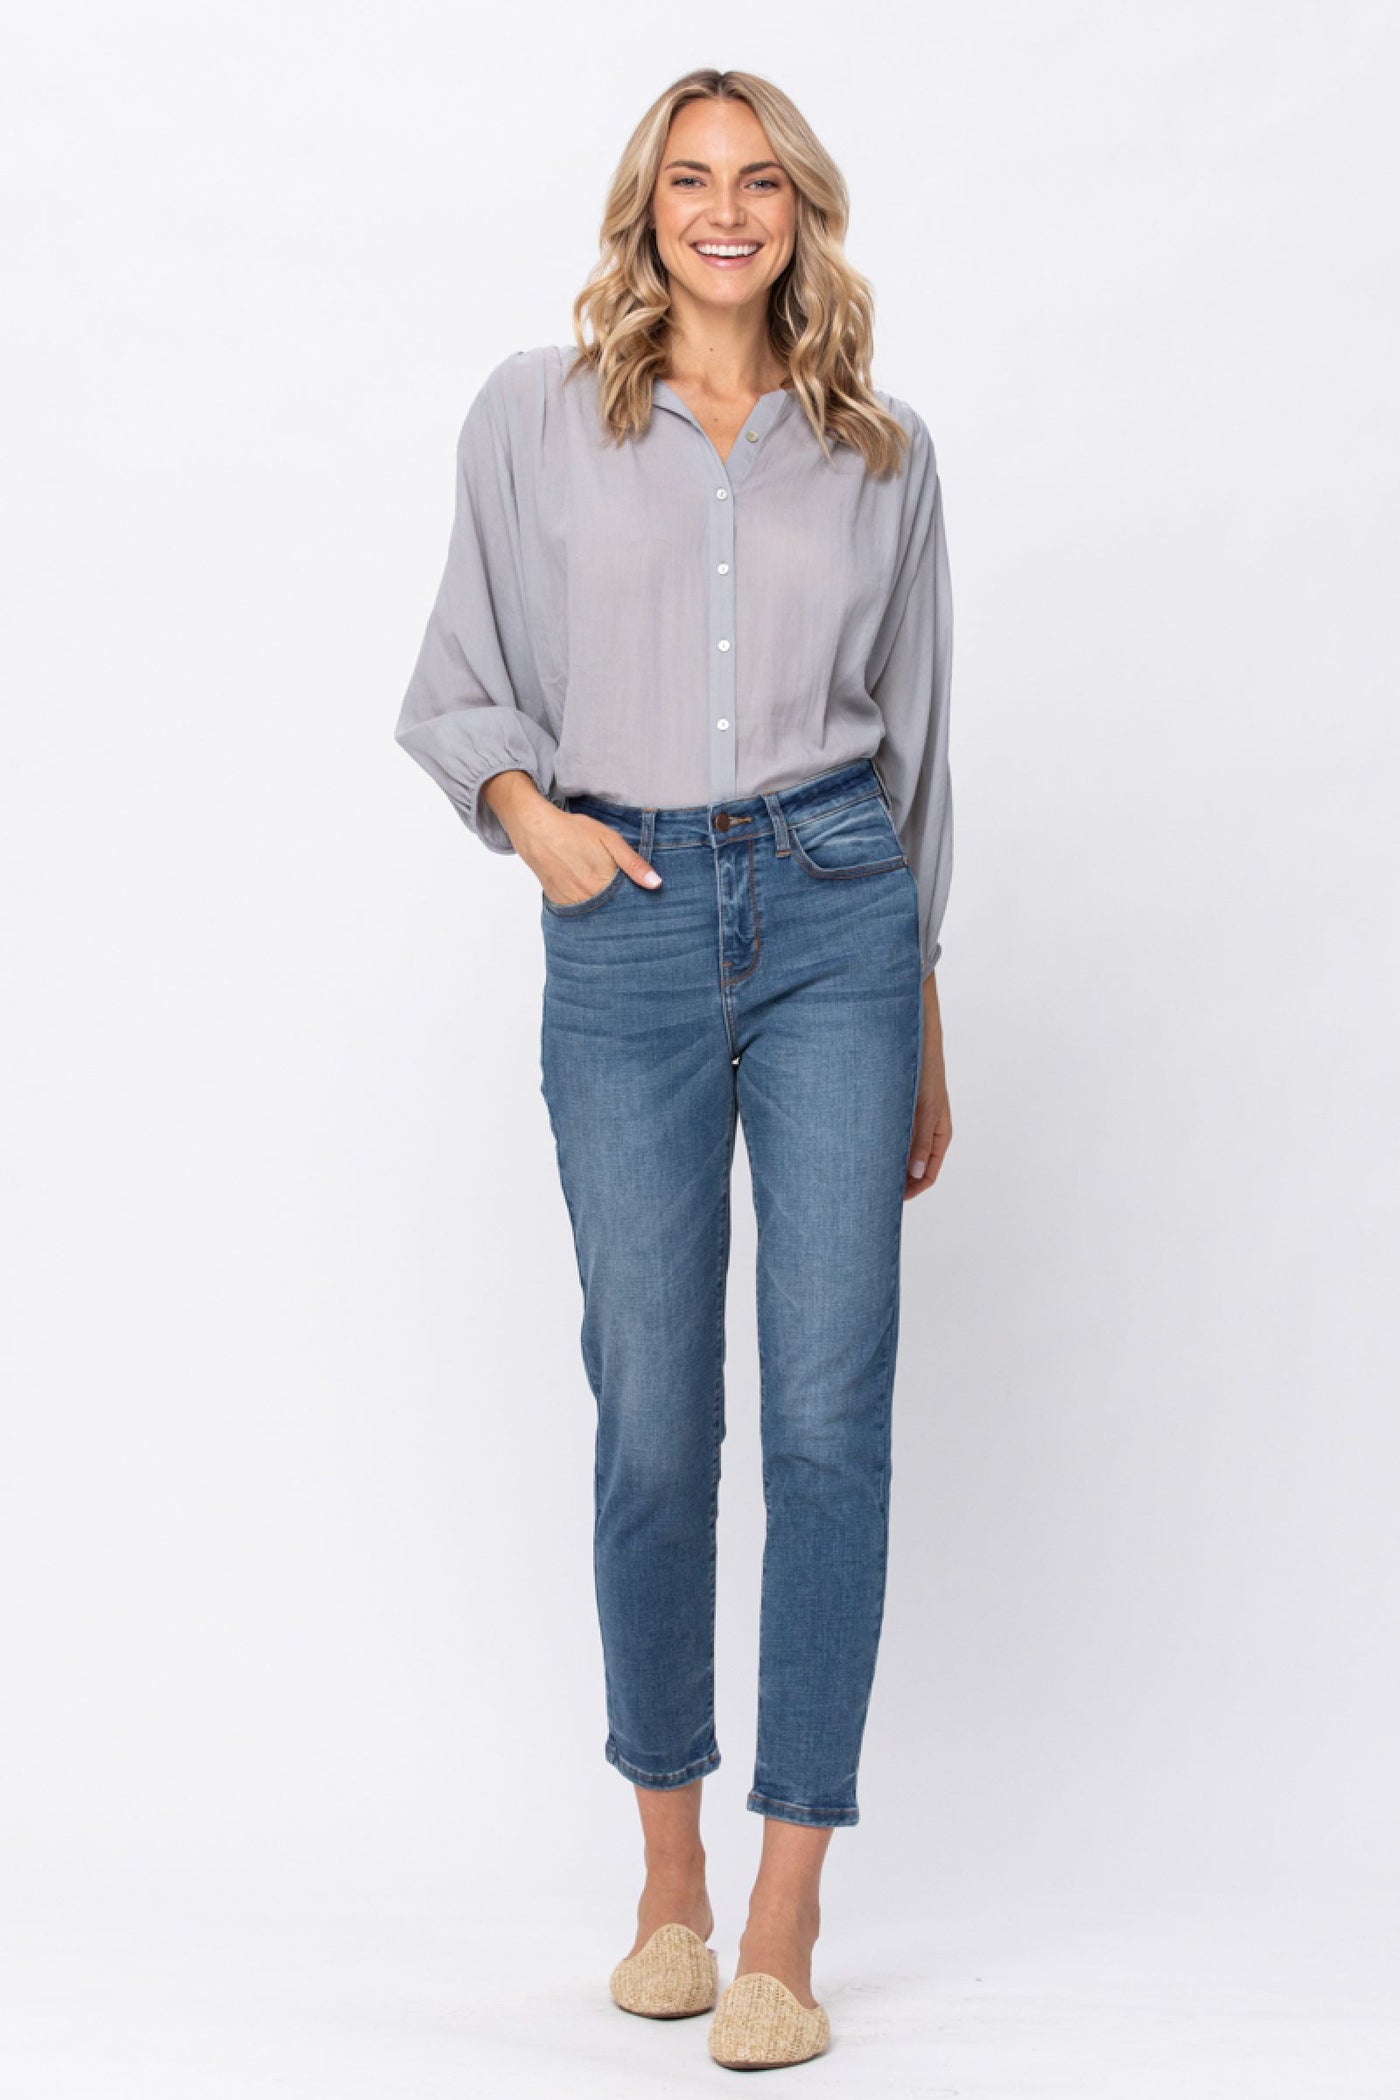 Judy Blue Hi-Waist Relaxed Fit - Corinne Boutique Family Owned and Operated USA